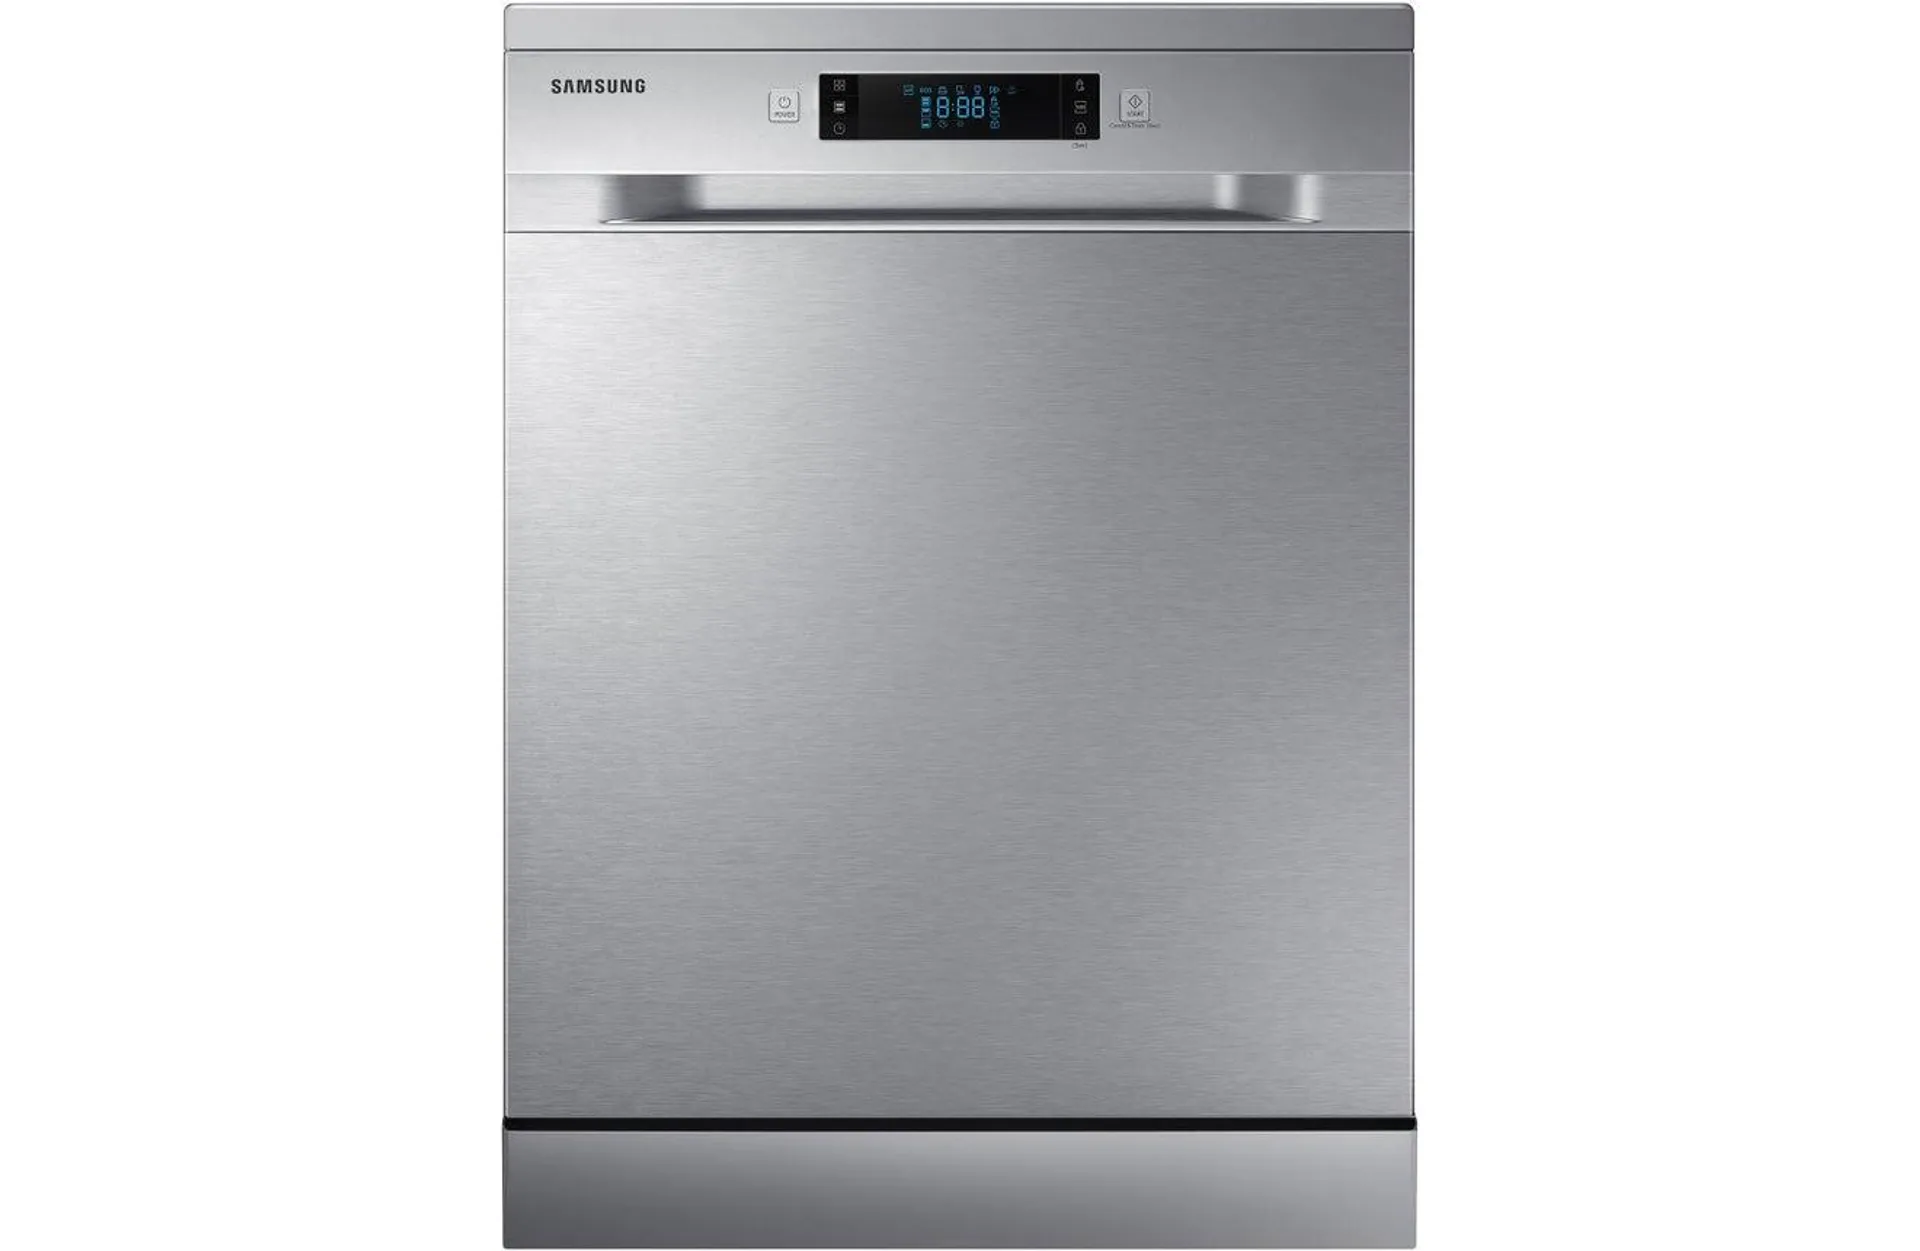 Samsung 14 Place Setting Stainless Steel Dishwasher - DW60M6055FS